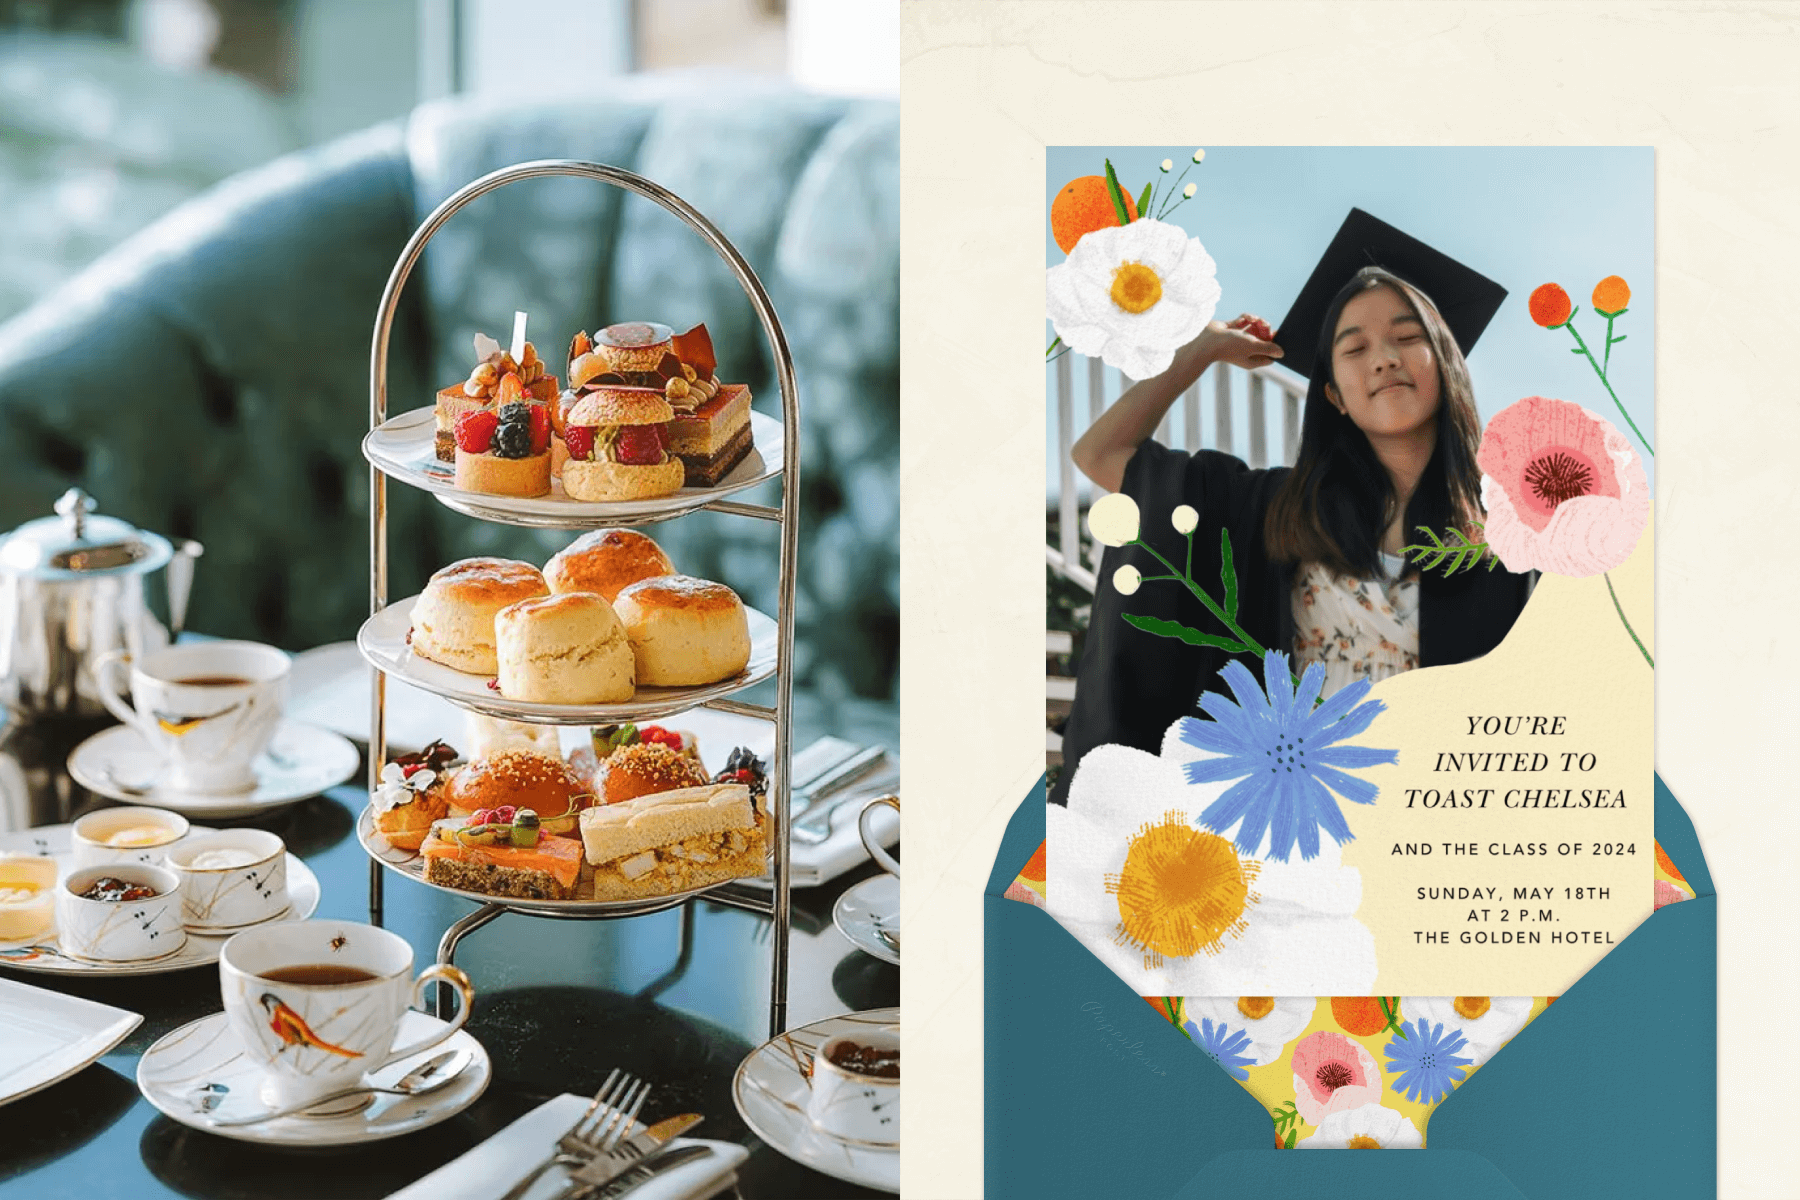 finger sandwiches on a three-tiered platter and tea cups and saucers; an invitation with a photo of a young woman in a cap and gown and colorful flowers overlapping the image